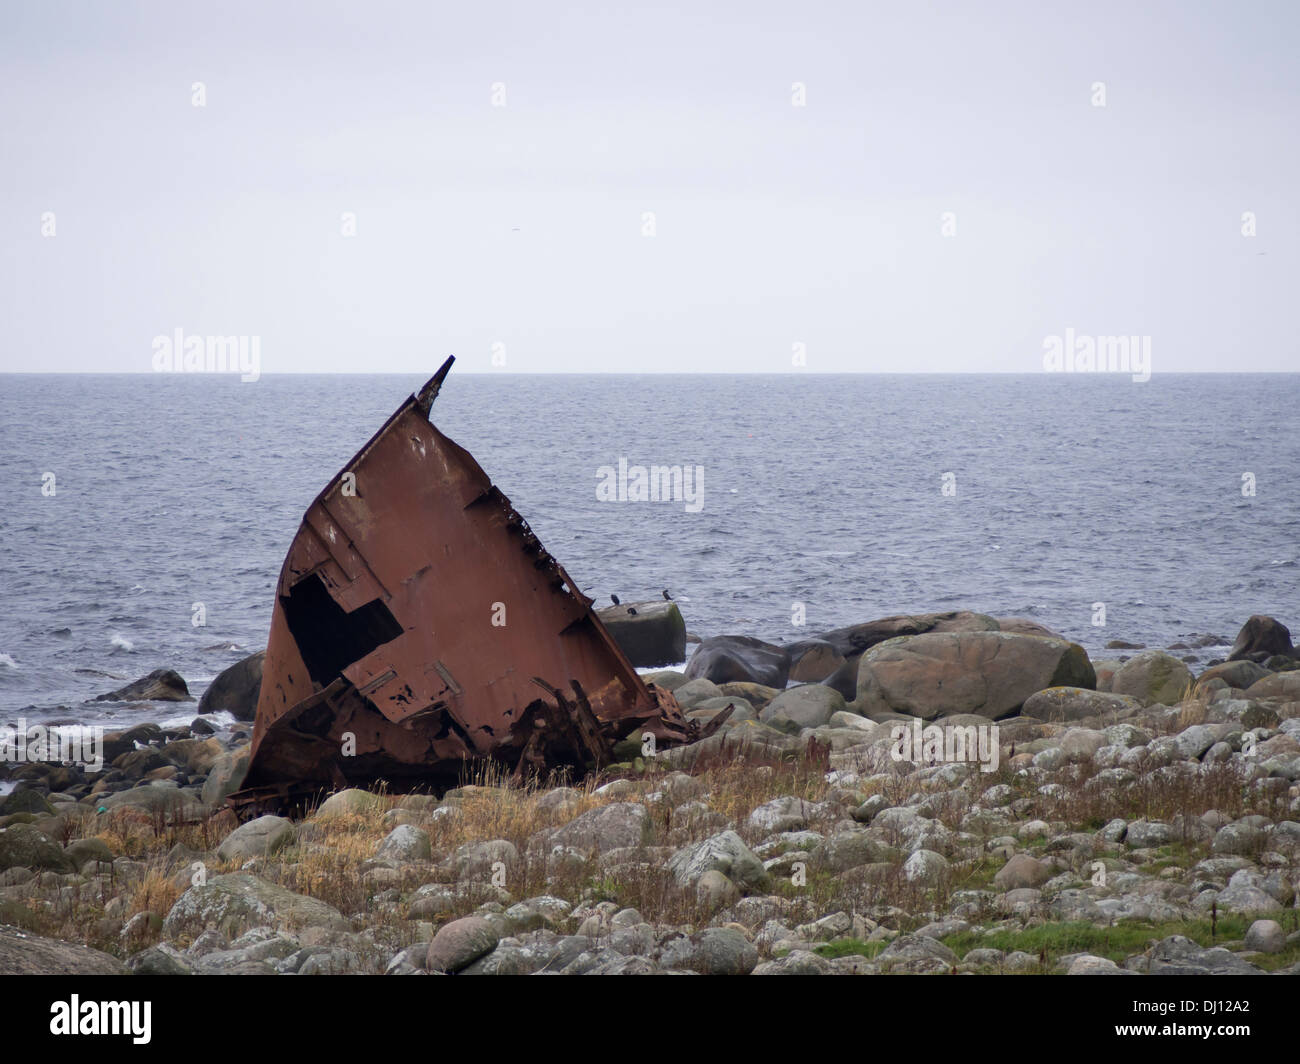 Rusty shipwreck on the shoreline of the North sea, Jæren near Stavanger Norway, rolling stones, stone wall and rough seas Stock Photo